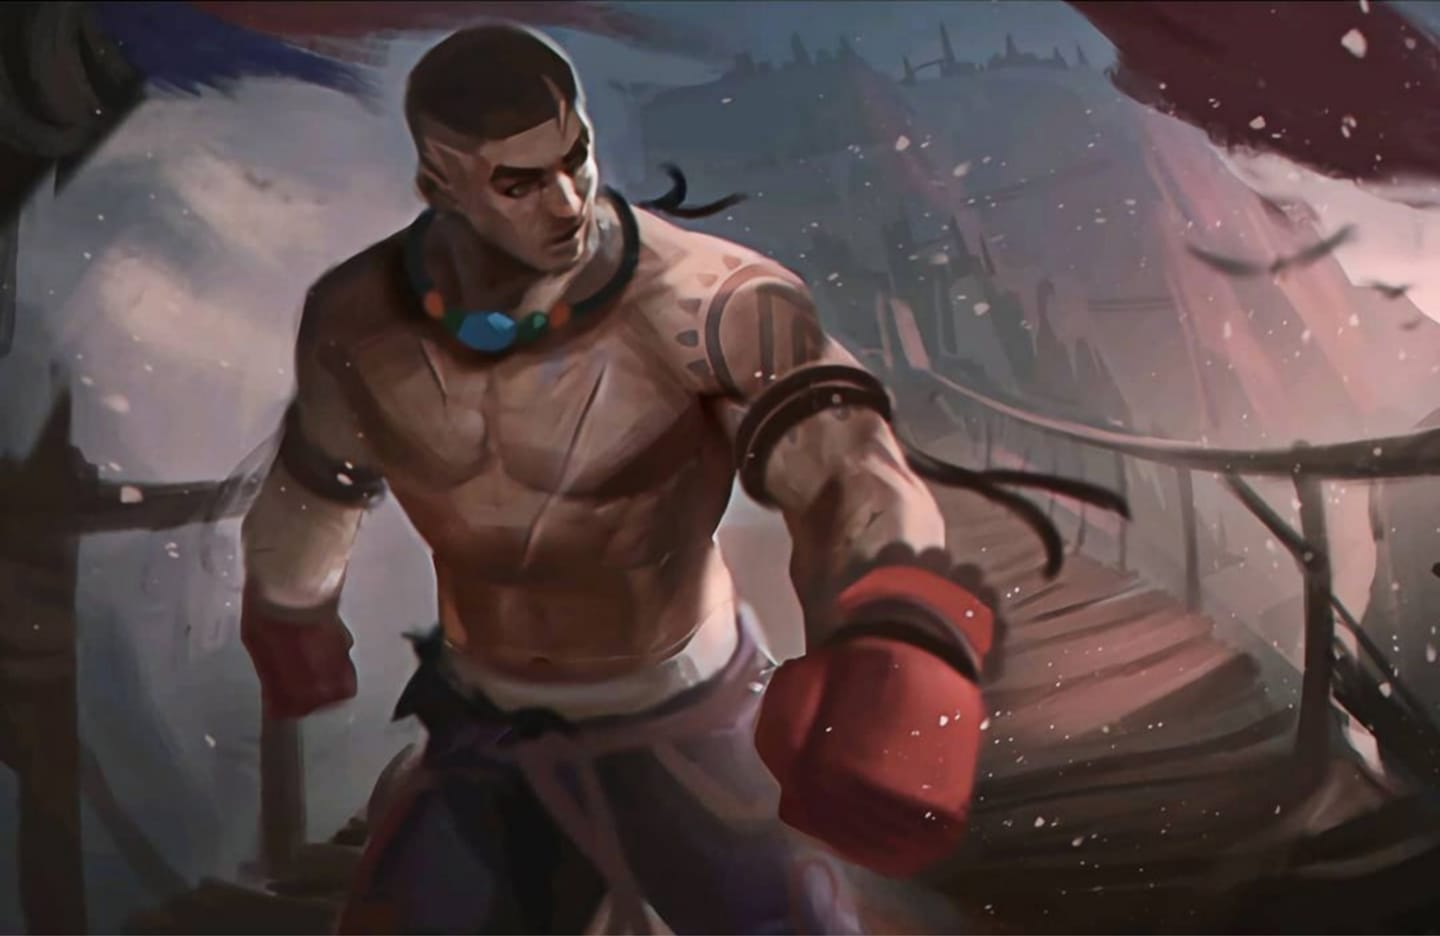 5 New Heroes in Mobile Legends, Upcoming in 2021